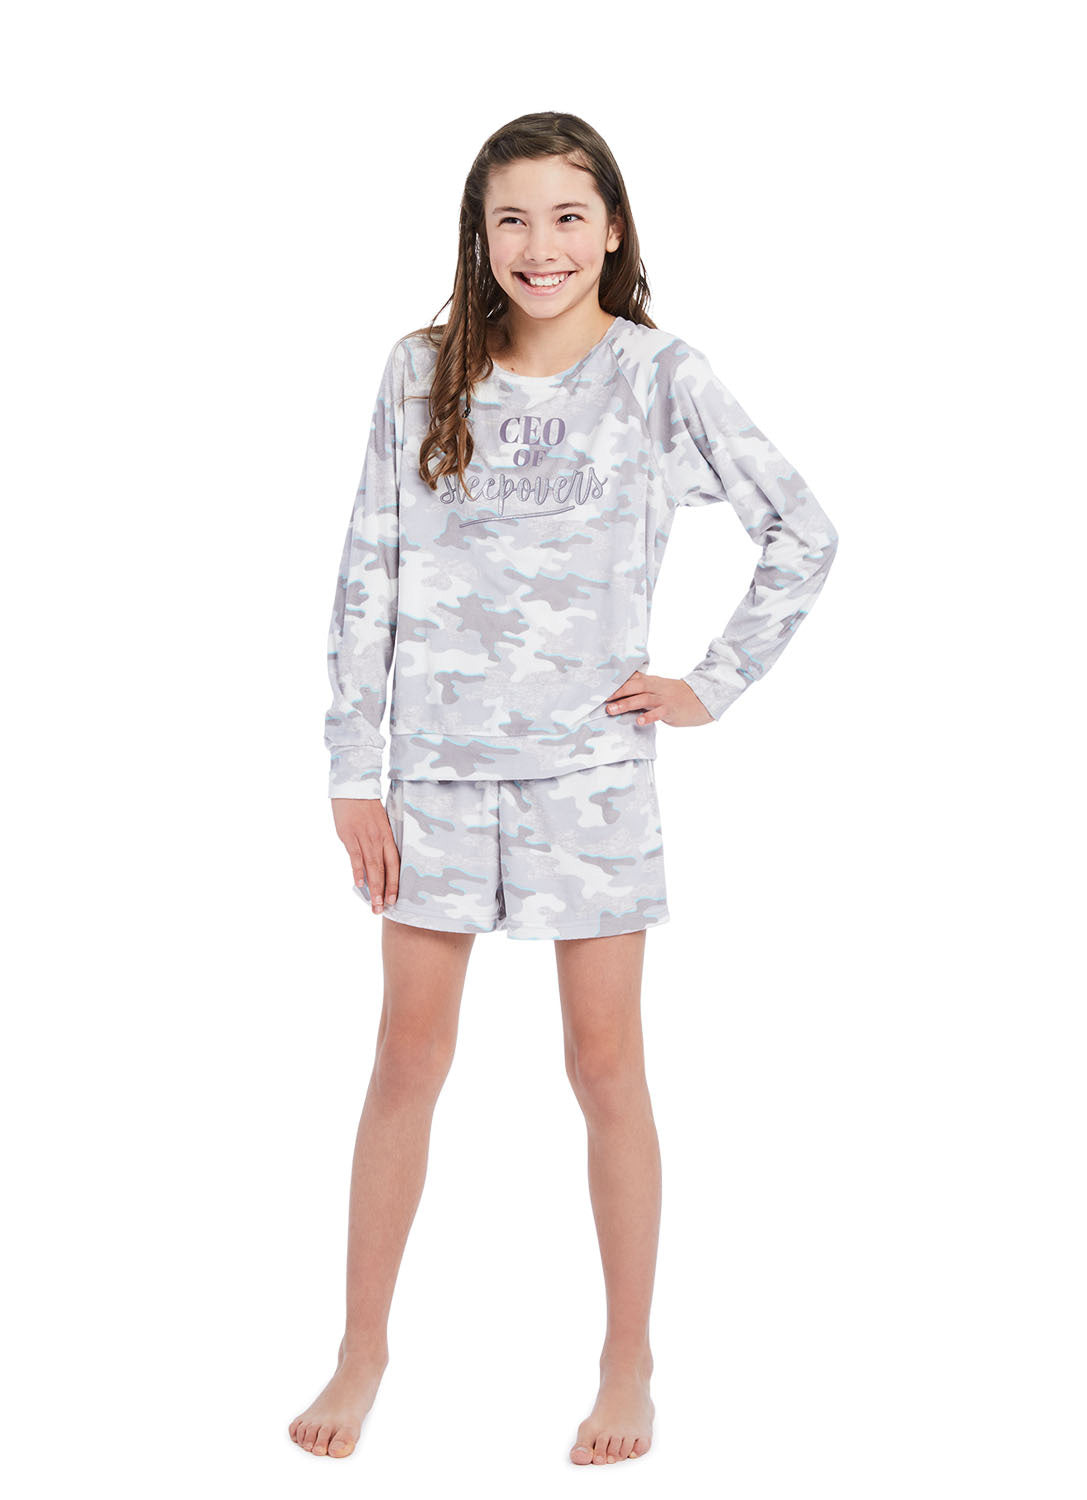 Girl wearing long-sleeved shirt and shorts (gray & white colors)